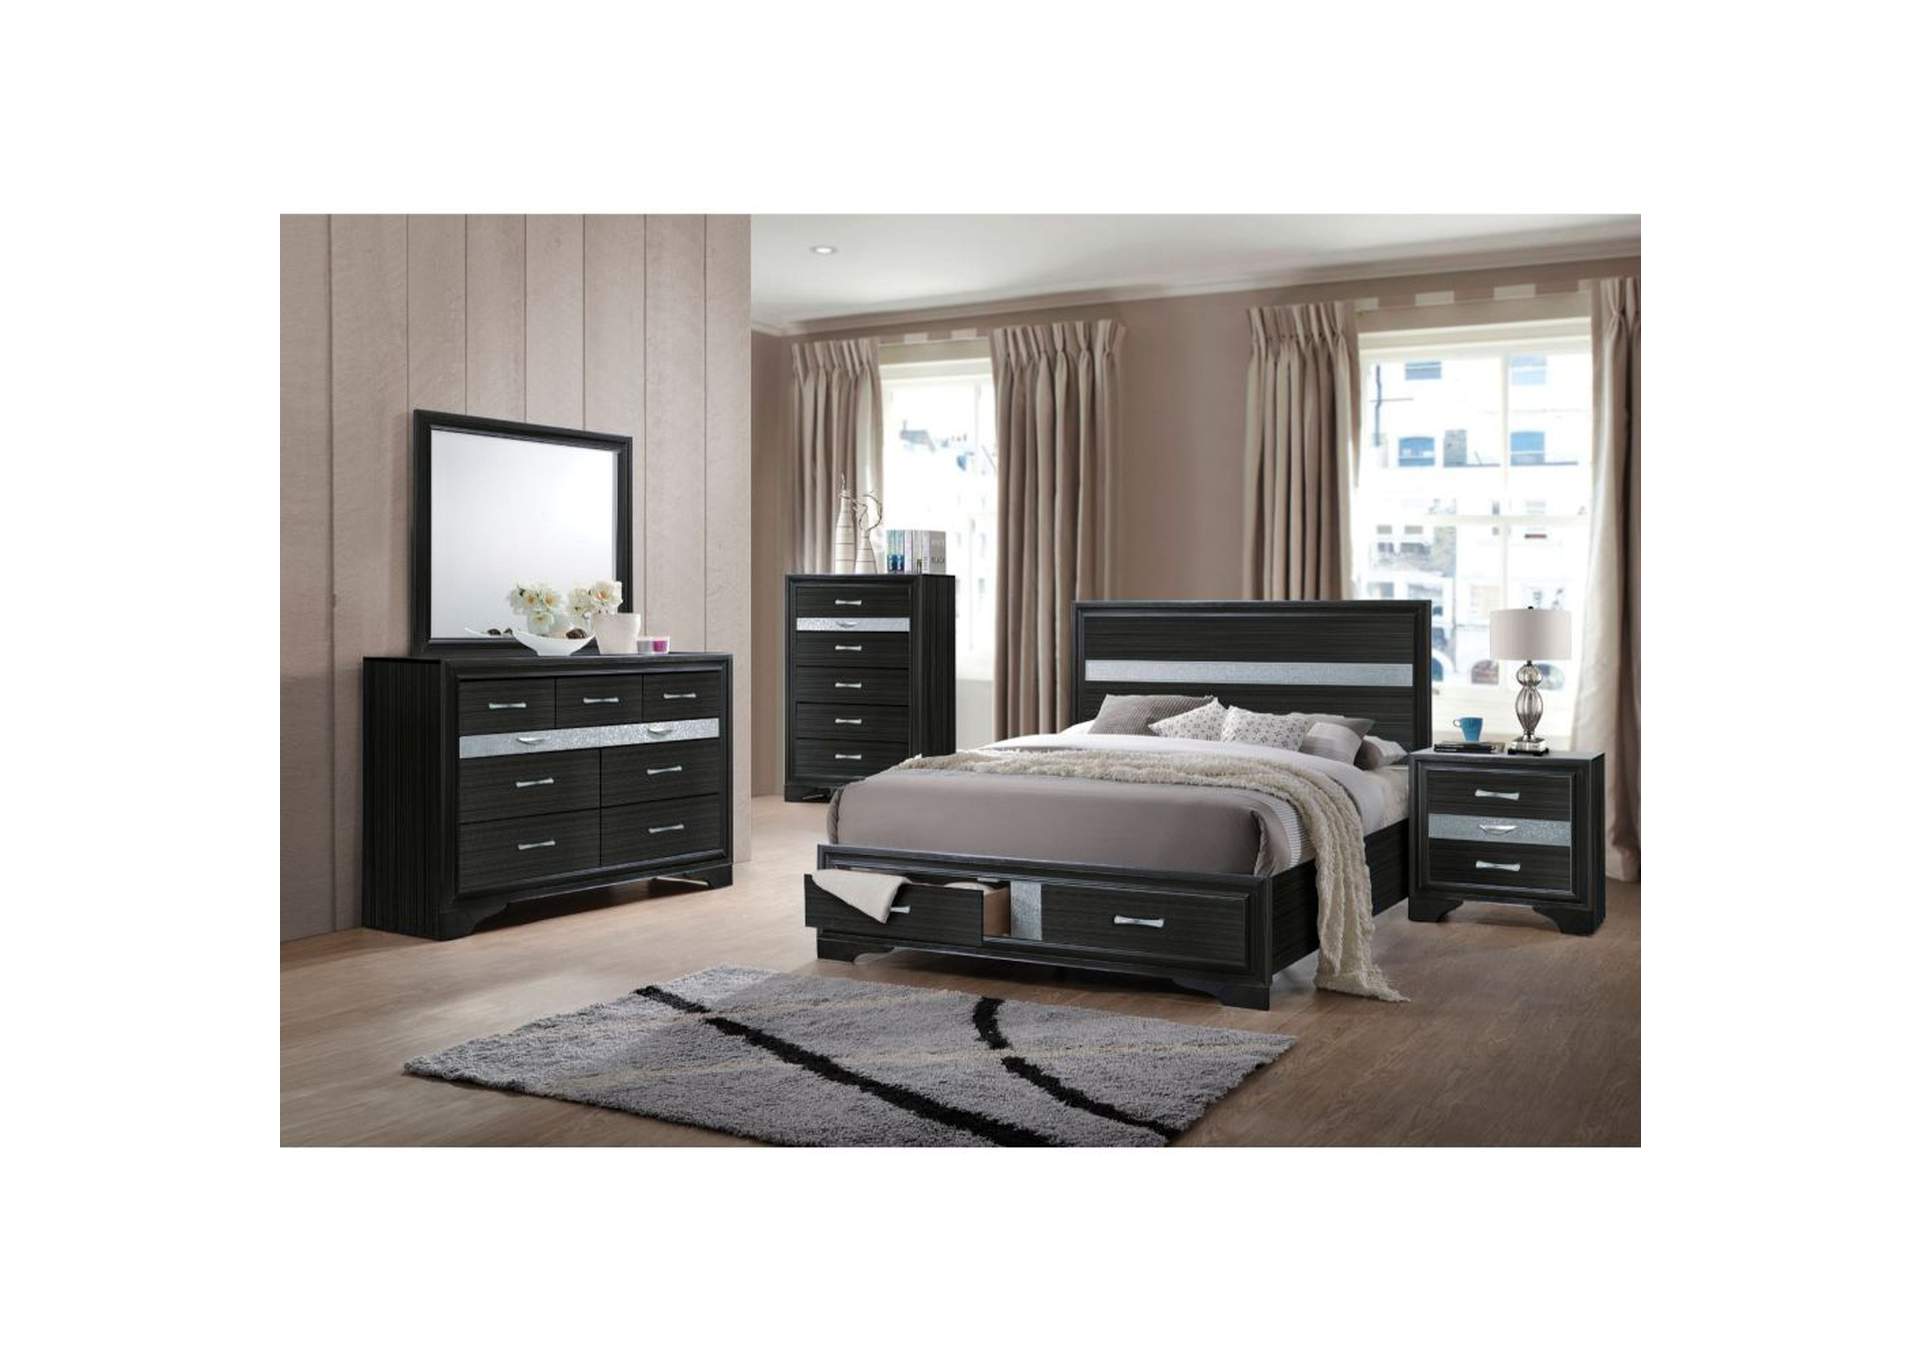 Black Naima Queen Bed,Acme